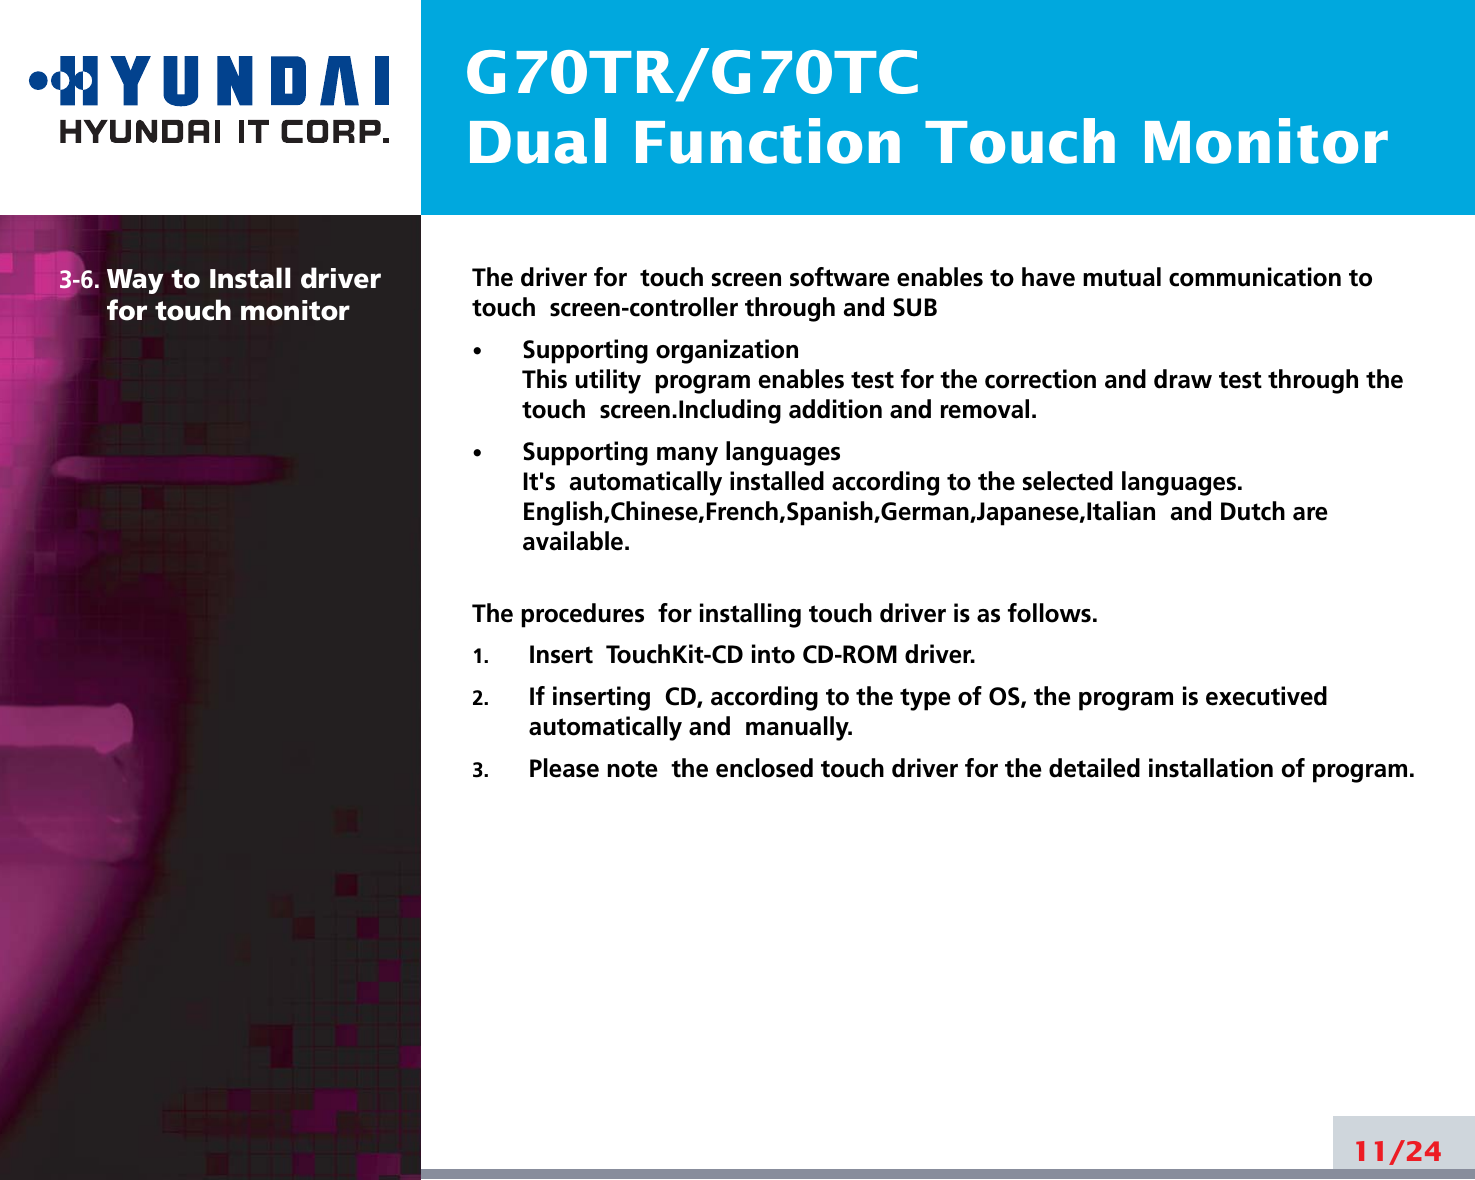 G70TR/G70TCDual Function Touch Monitor3-6. Way to Install driverfor touch monitorThe driver for  touch screen software enables to have mutual communication totouch  screen-controller through and SUB•Supporting organizationThis utility  program enables test for the correction and draw test through thetouch  screen.Including addition and removal.•Supporting many languagesIt&apos;s  automatically installed according to the selected languages.English,Chinese,French,Spanish,German,Japanese,Italian  and Dutch areavailable.The procedures  for installing touch driver is as follows.1. Insert  TouchKit-CD into CD-ROM driver.2. If inserting  CD, according to the type of OS, the program is executivedautomatically and  manually. 3. Please note  the enclosed touch driver for the detailed installation of program.11/24